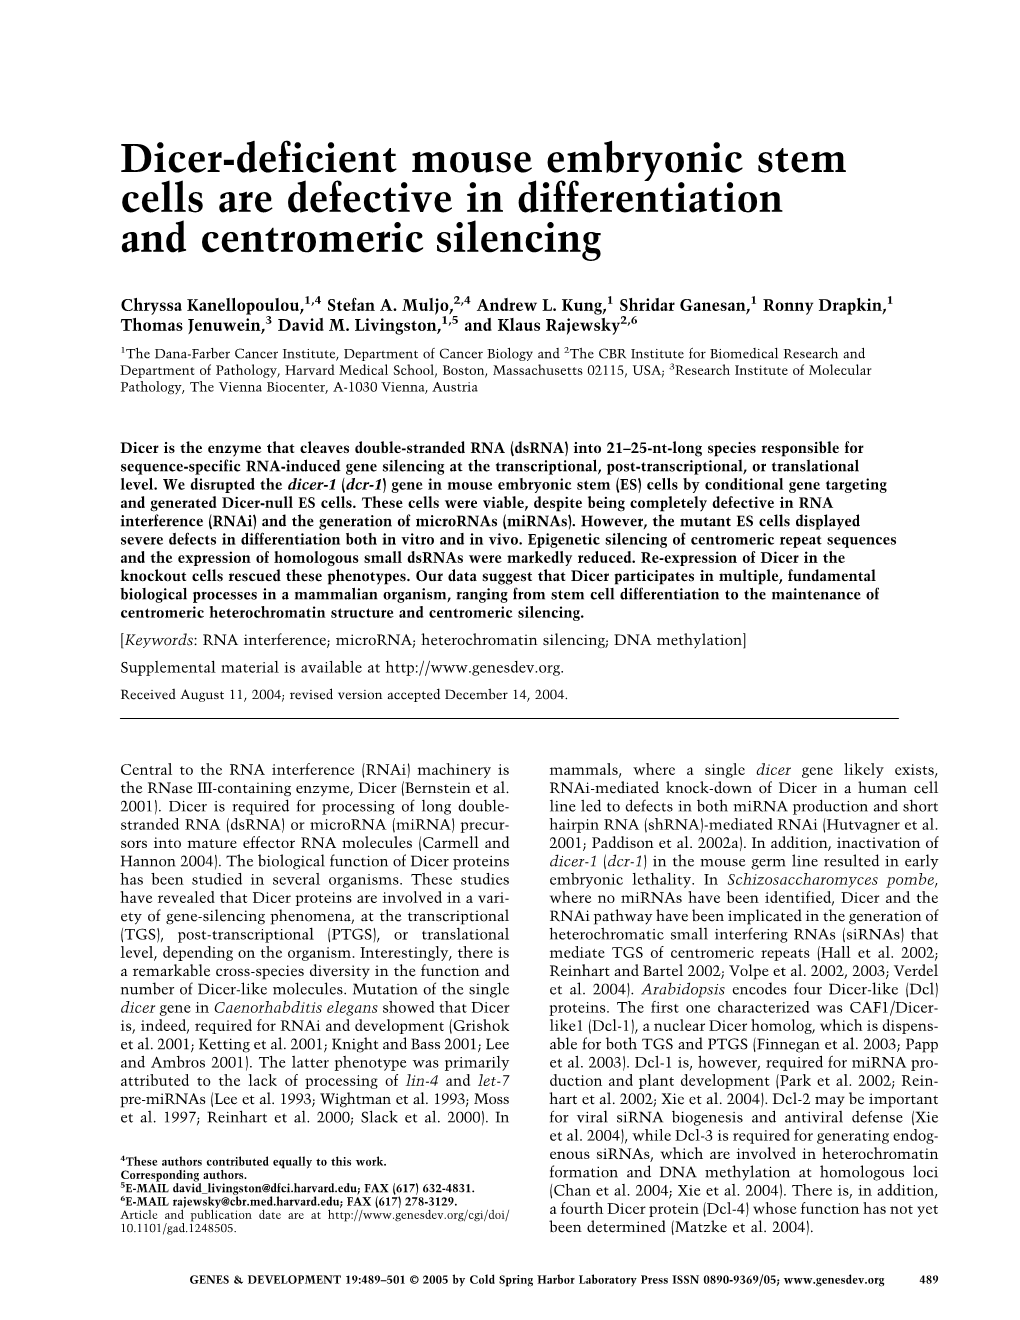 Dicer-Deficient Mouse Embryonic Stem Cells Are Defective in Differentiation and Centromeric Silencing